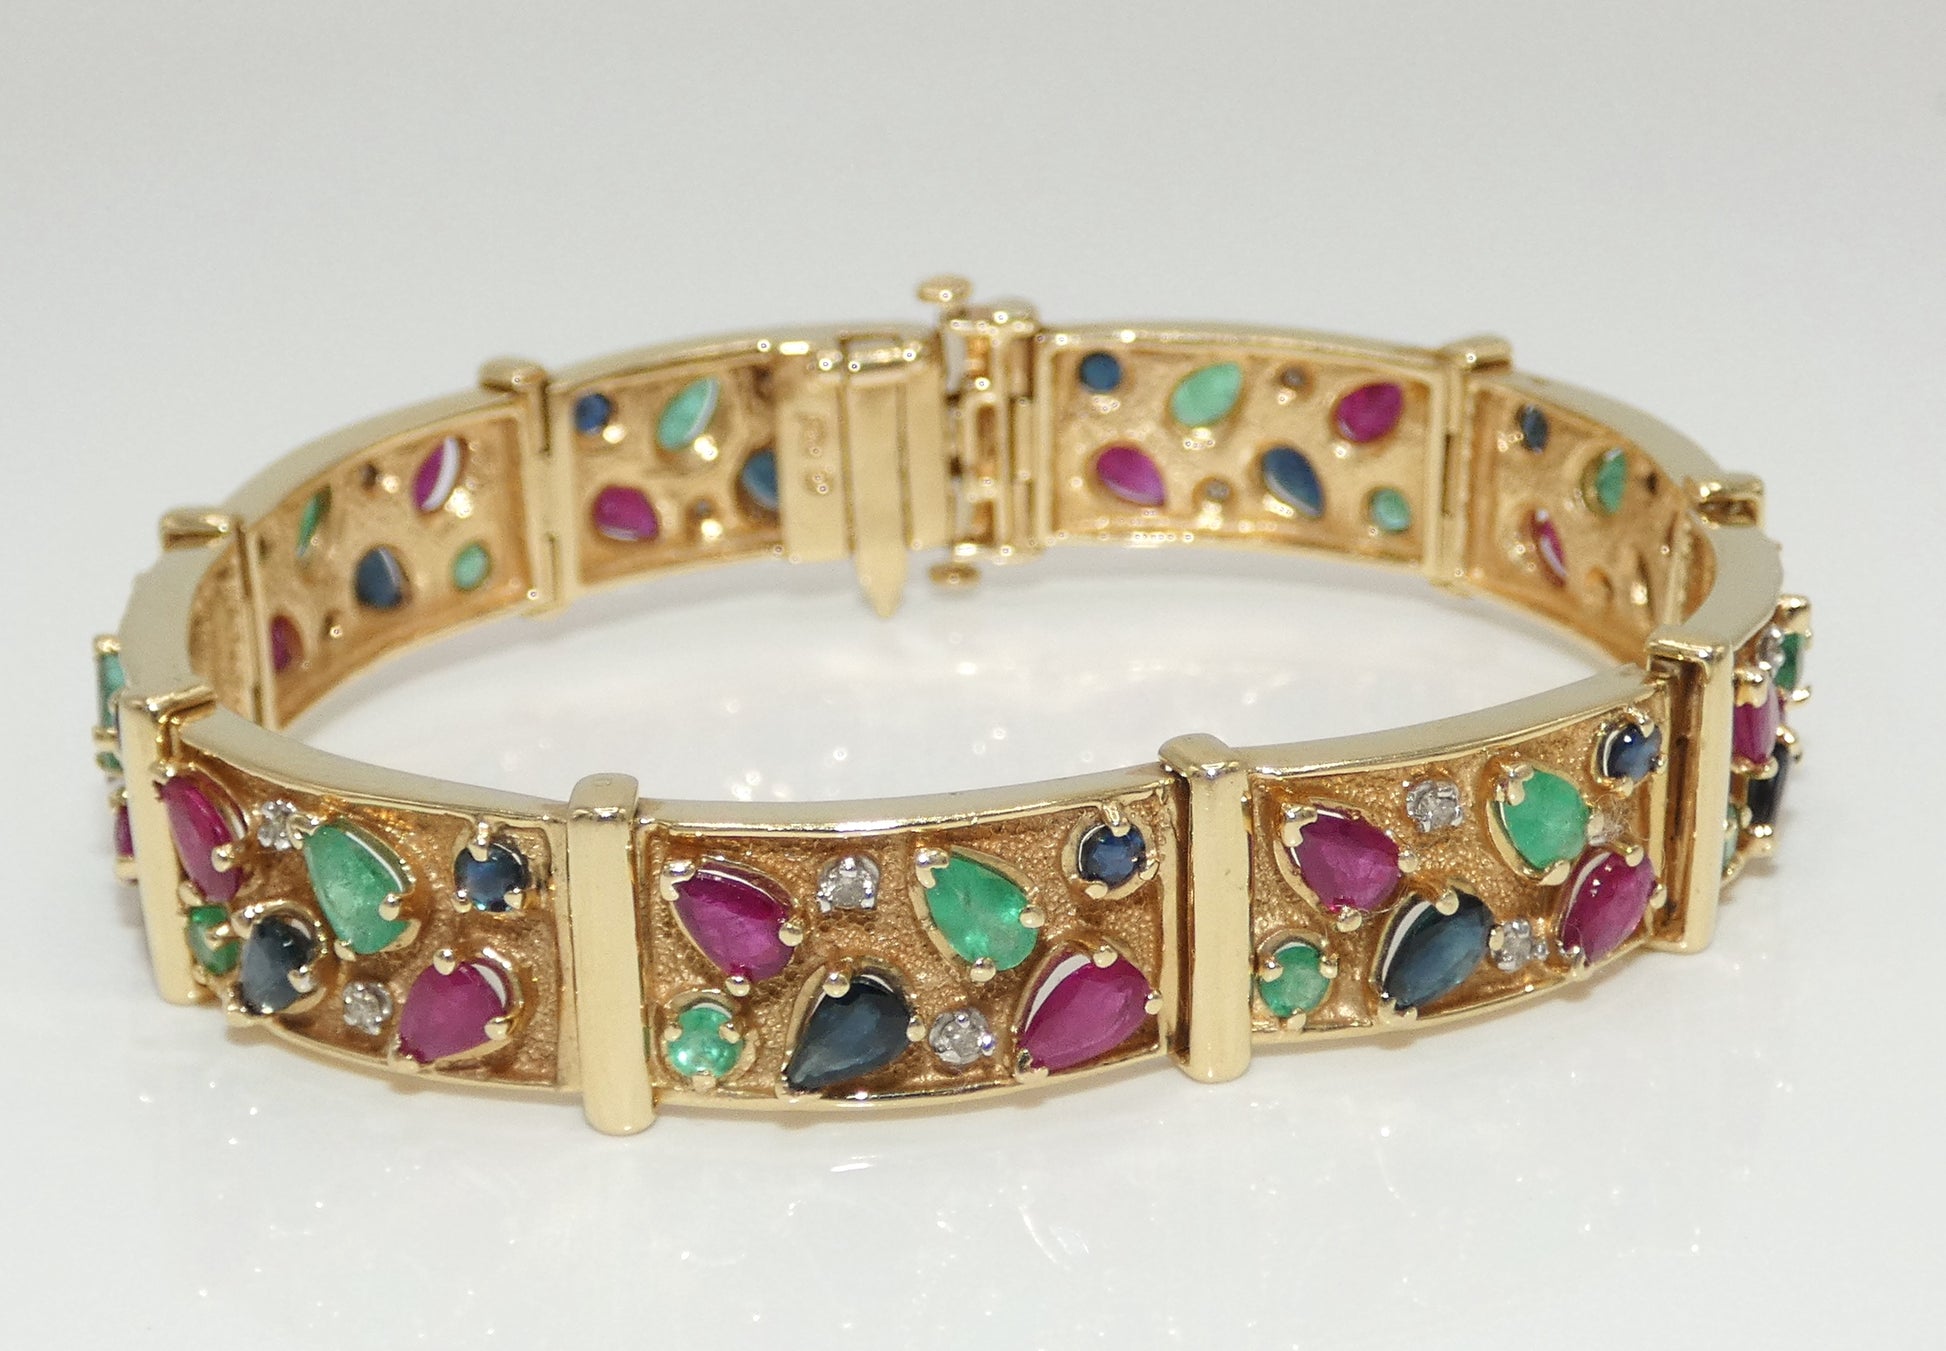 14k Gold 0.25 Carat Diamond clover bracelet with Emerald, Ruby and